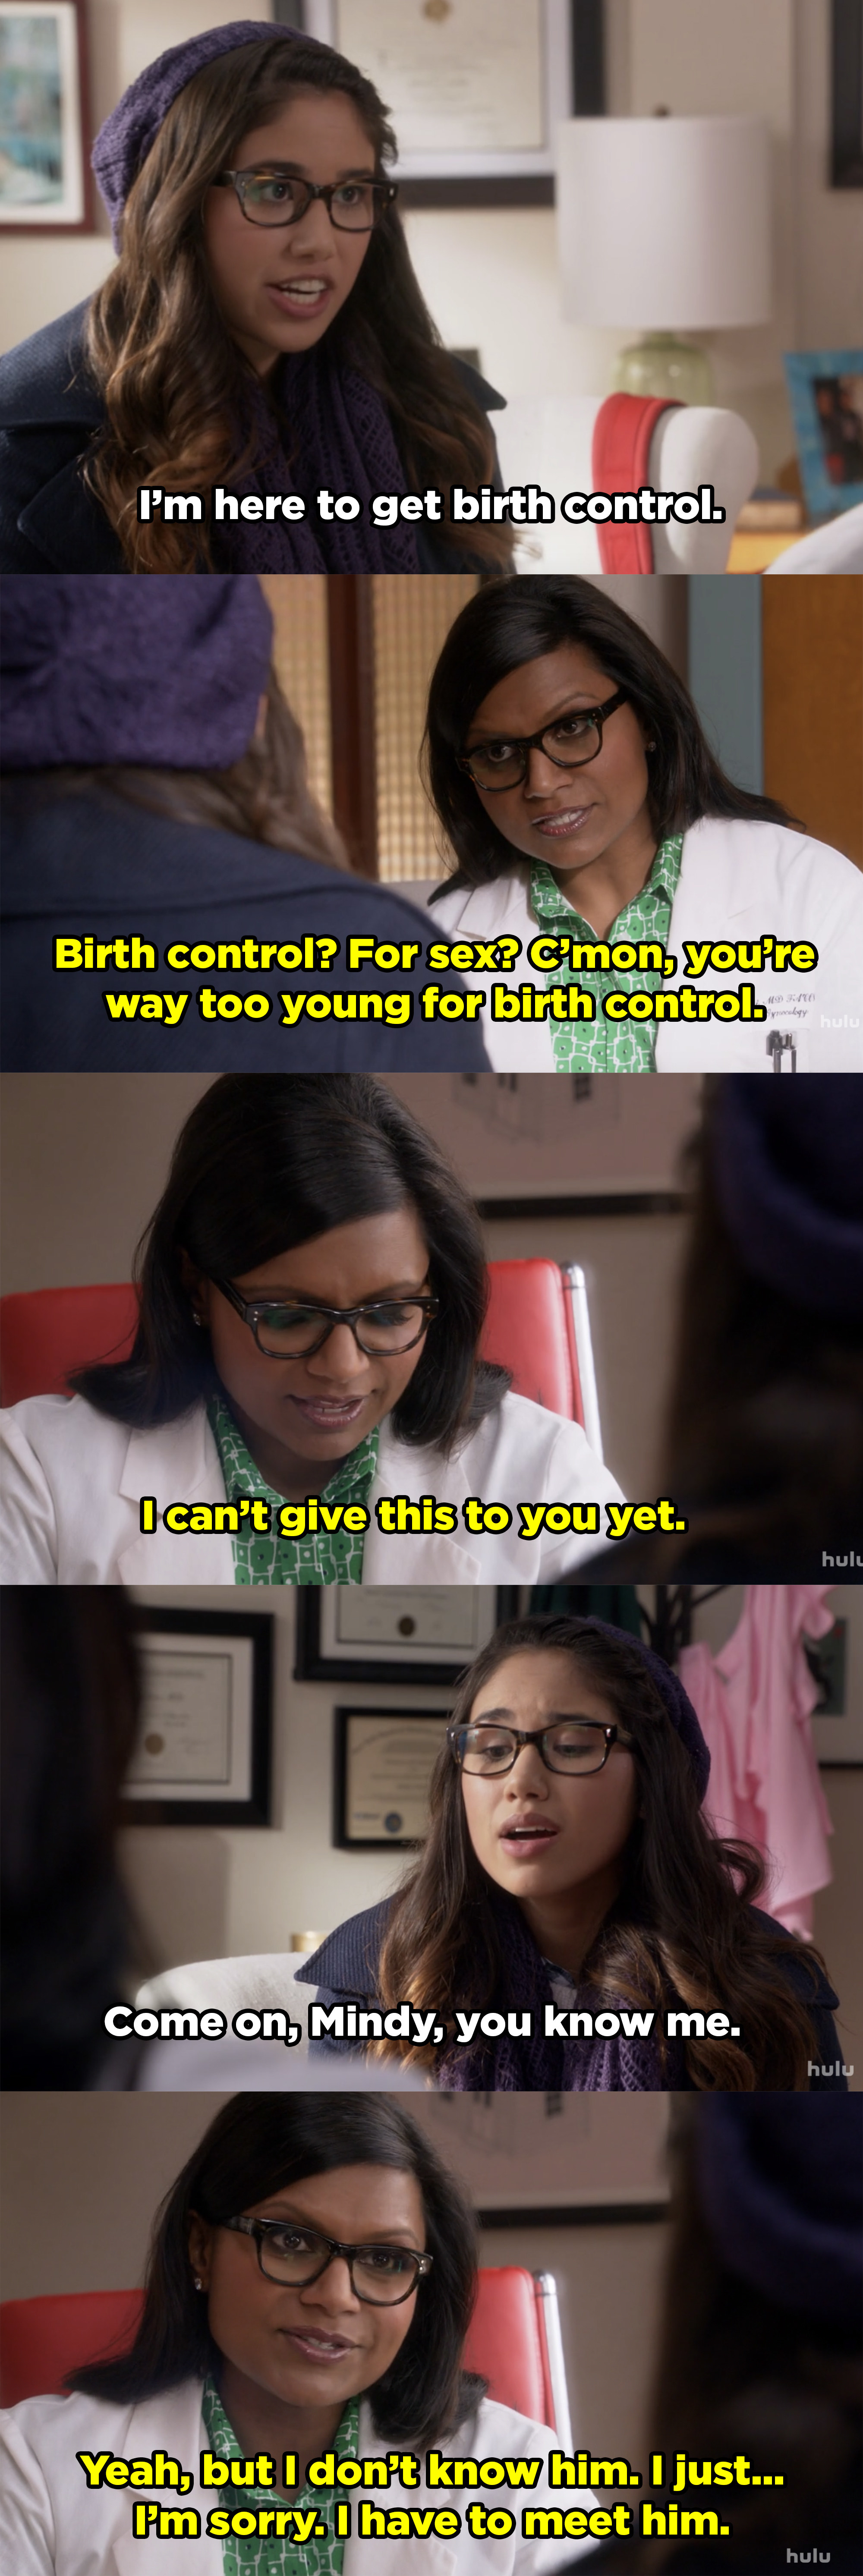 Mindy refusing to give a teen patient birth control because even though she knows her, she doesn&#x27;t know her boyfriend. So, she demands to meet him. 